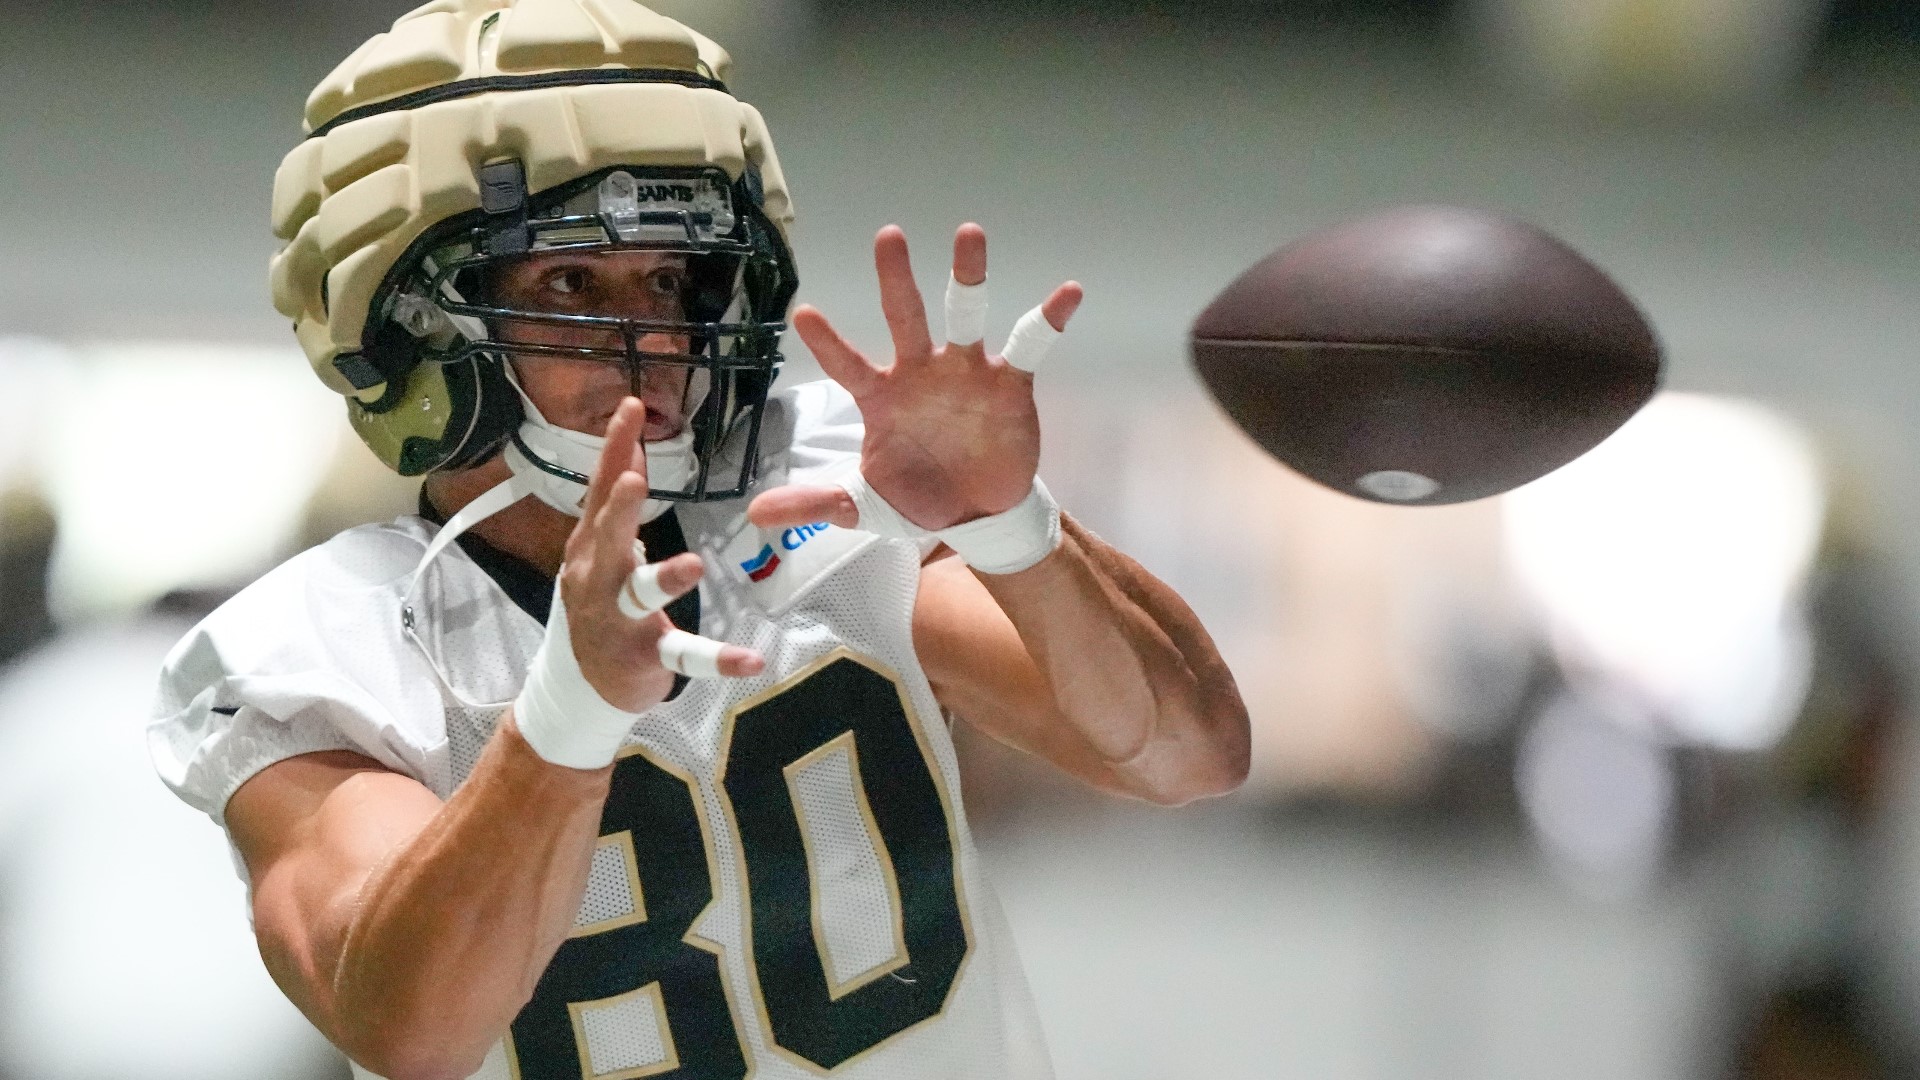 Saints tight end Jimmy Graham is expected to return this week to practice following what team officials have described as a “medical episode” that led to arrest.